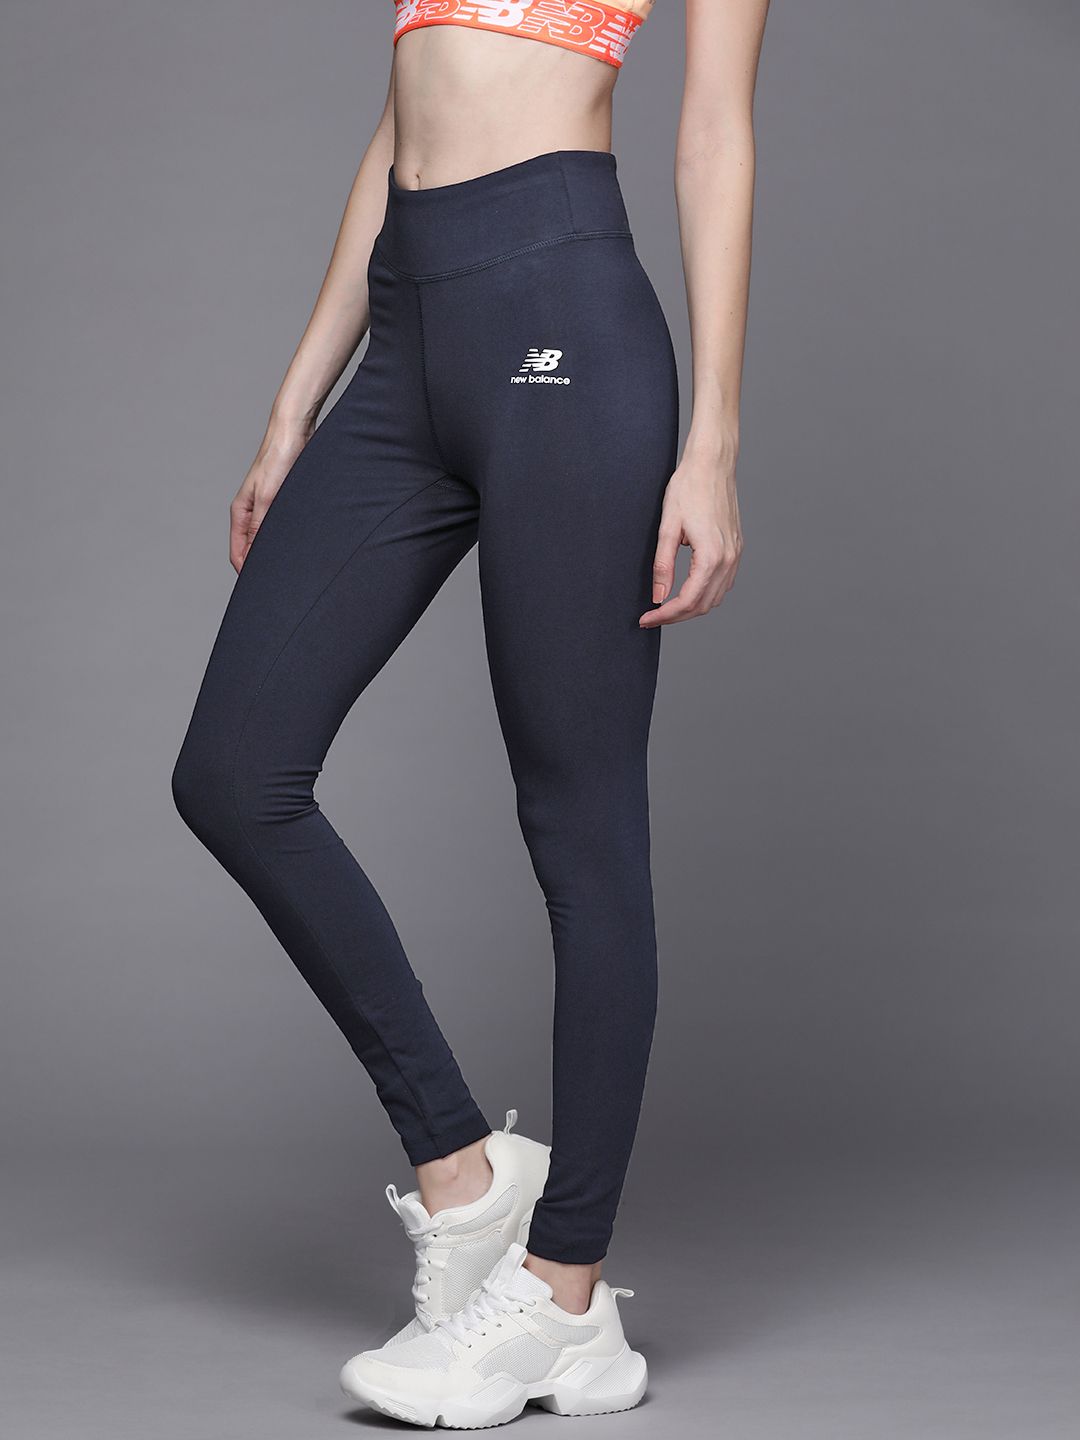 New Balance Women Navy Blue Solid Sports Tights Price in India